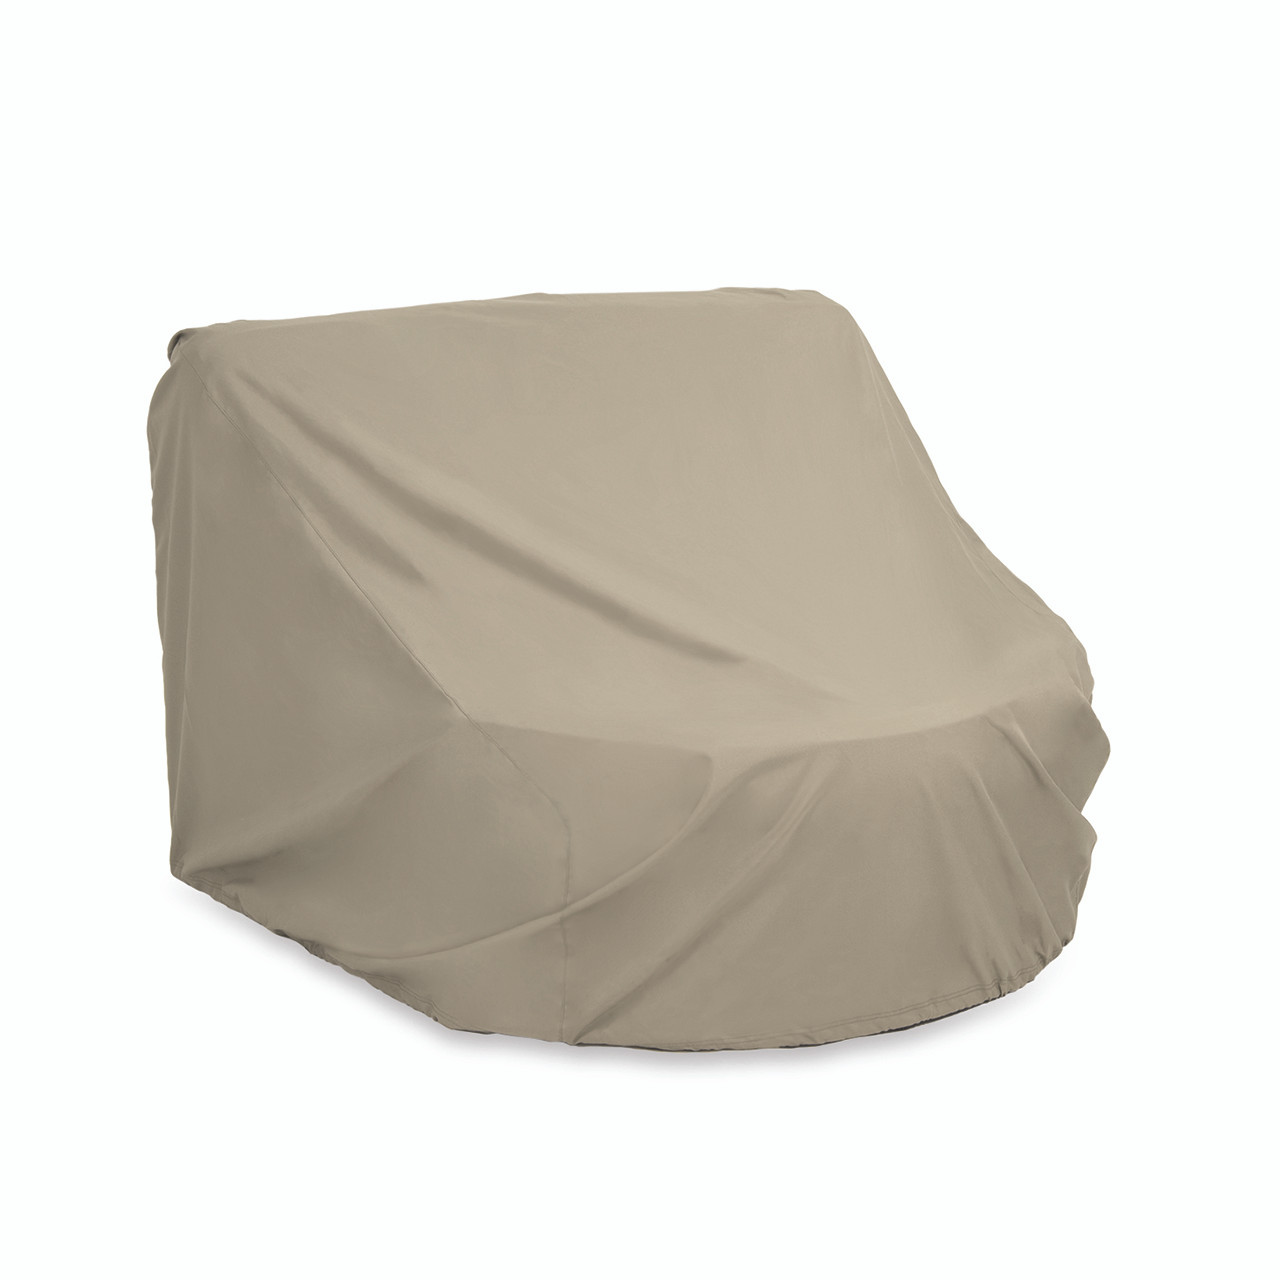 50 x 48 in. Cuddle Chair Protective Cover